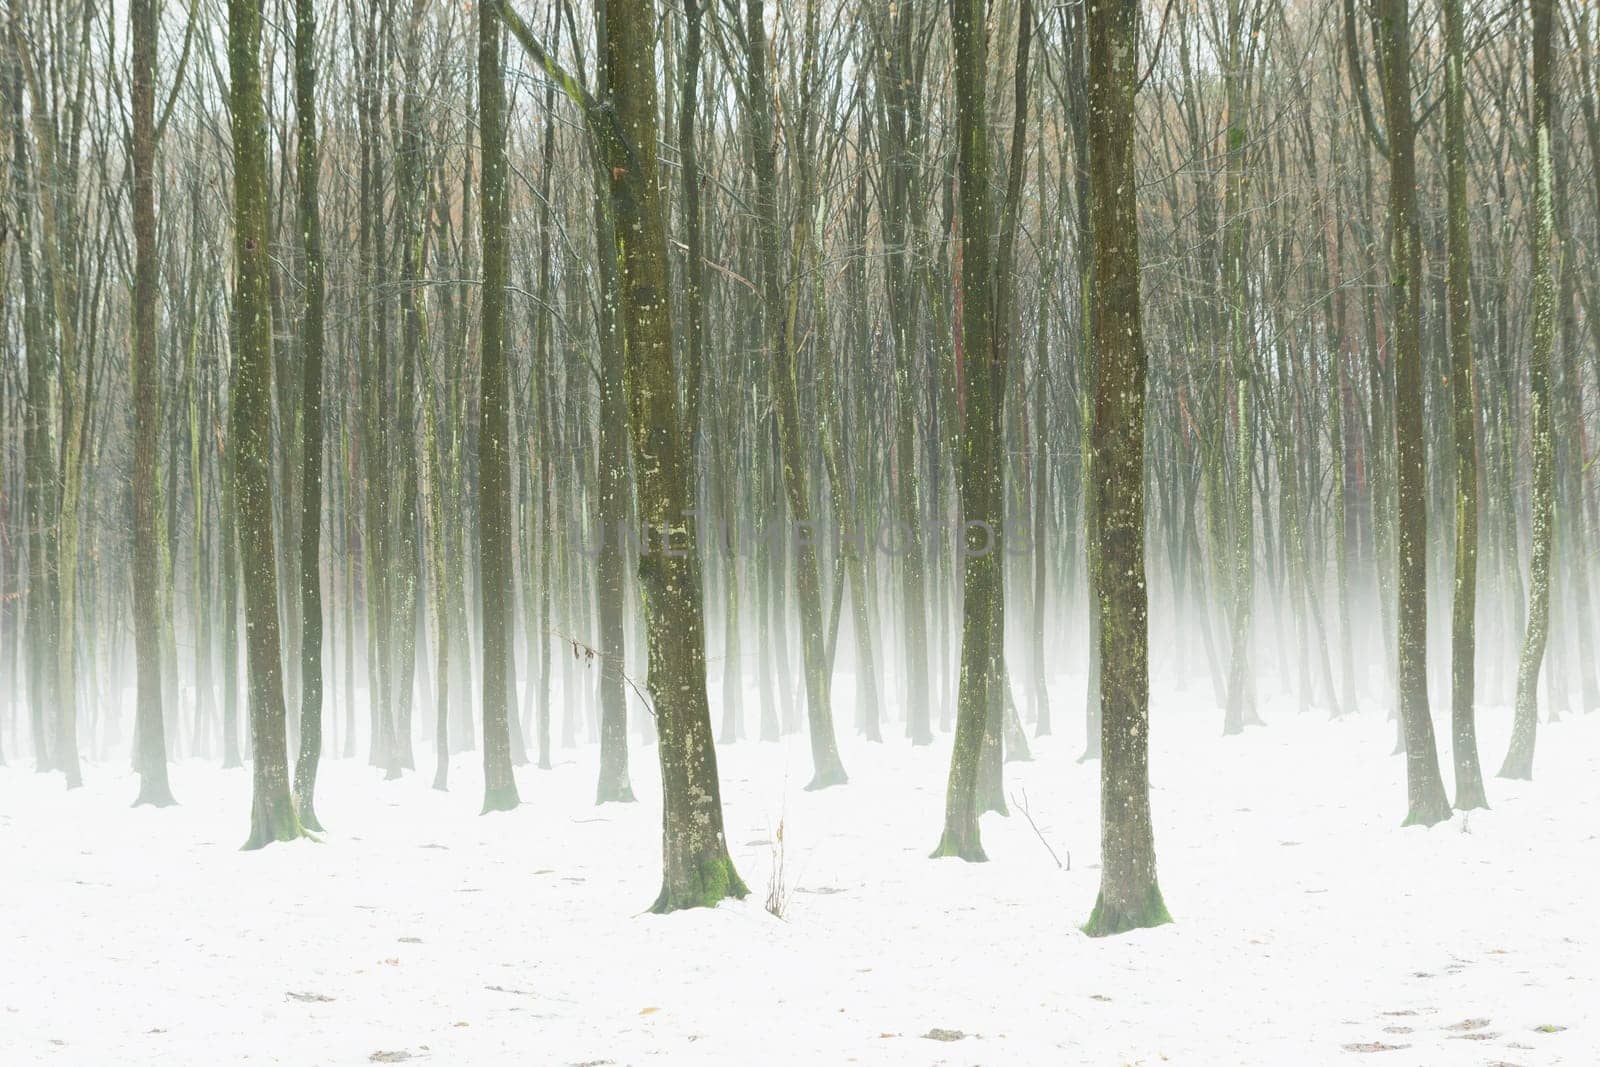 Fog in a snow-covered dense forest by darekb22